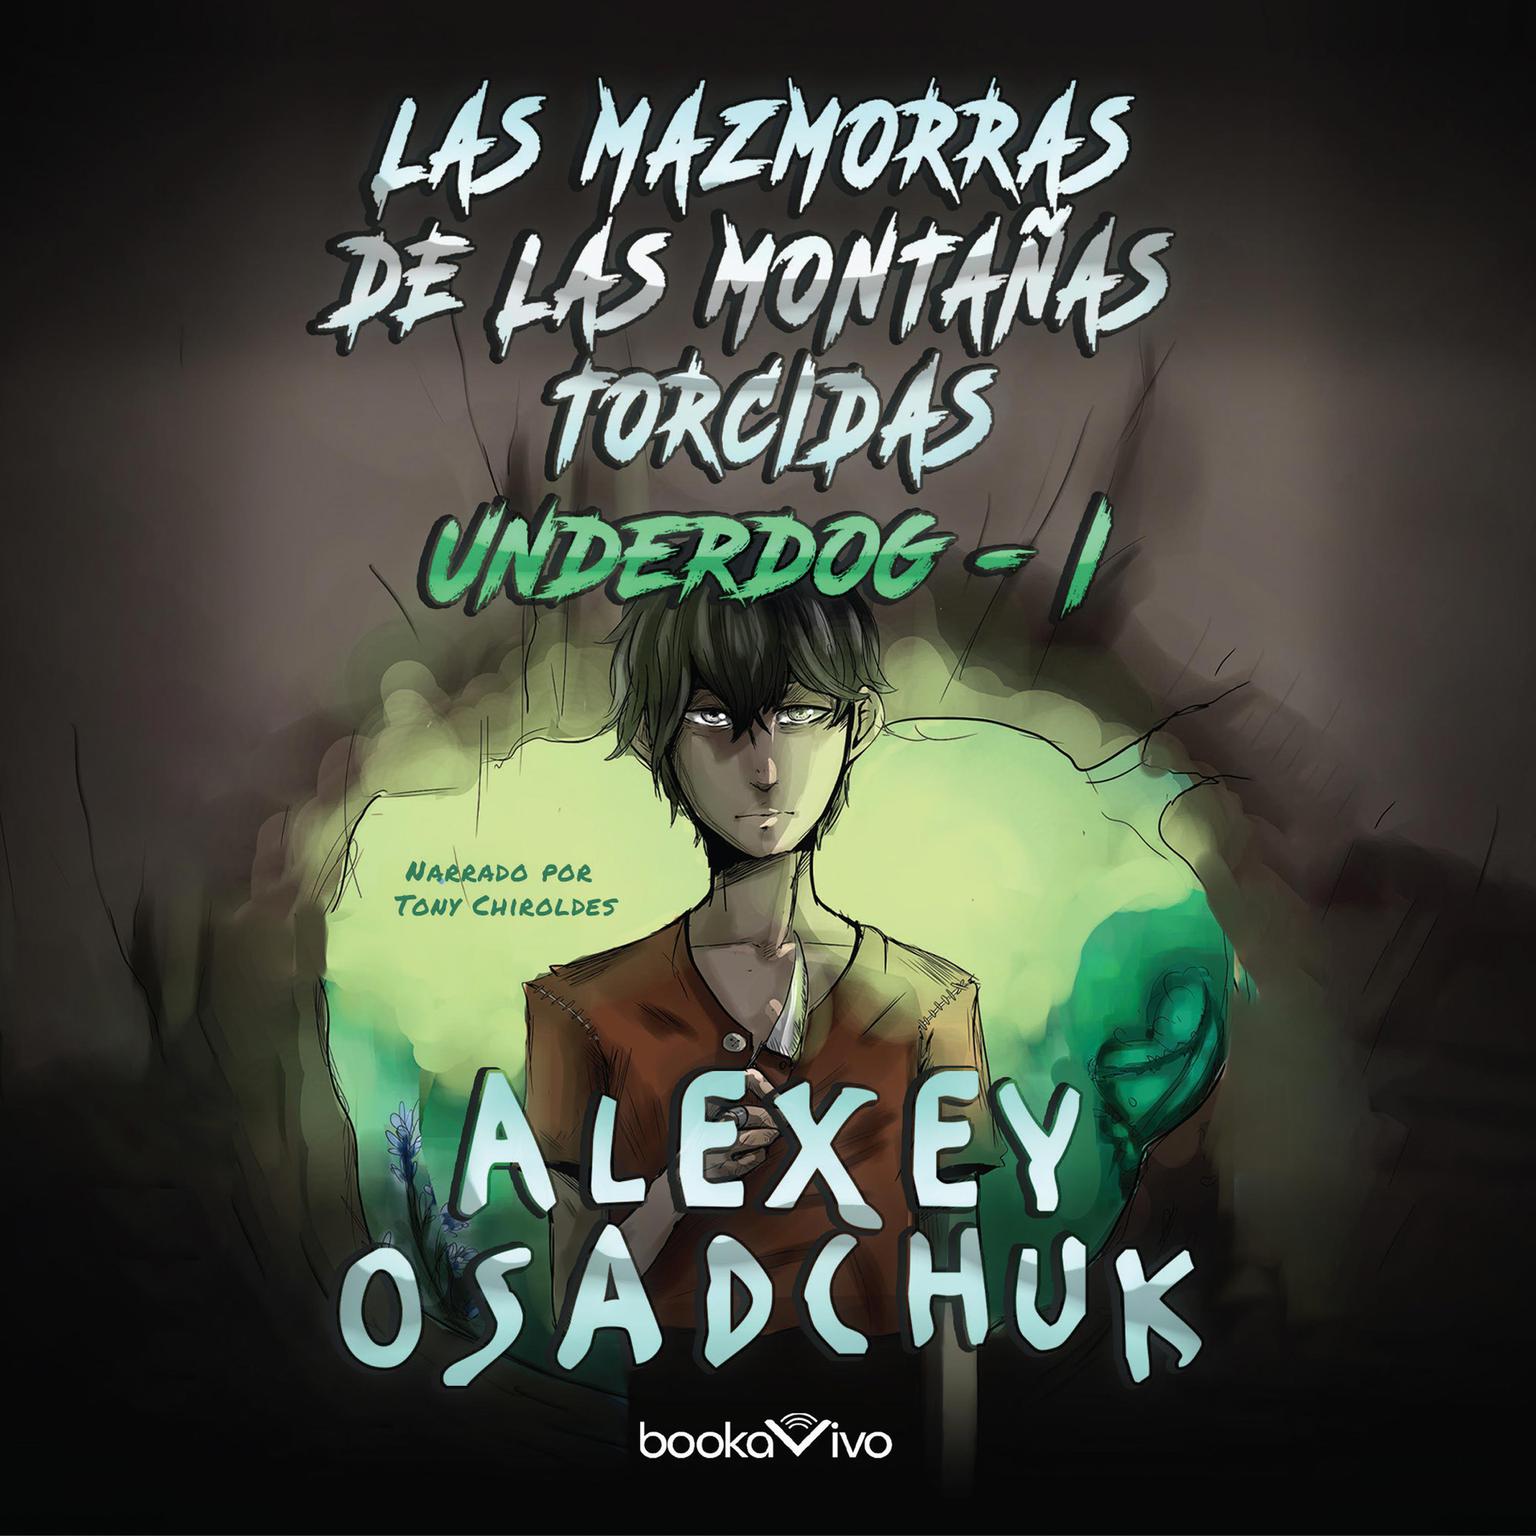 Las Mazmorras de las Montanas Torcidas (Dungeons of the Crooked Mountains) Audiobook, by Alexey Osadchuk